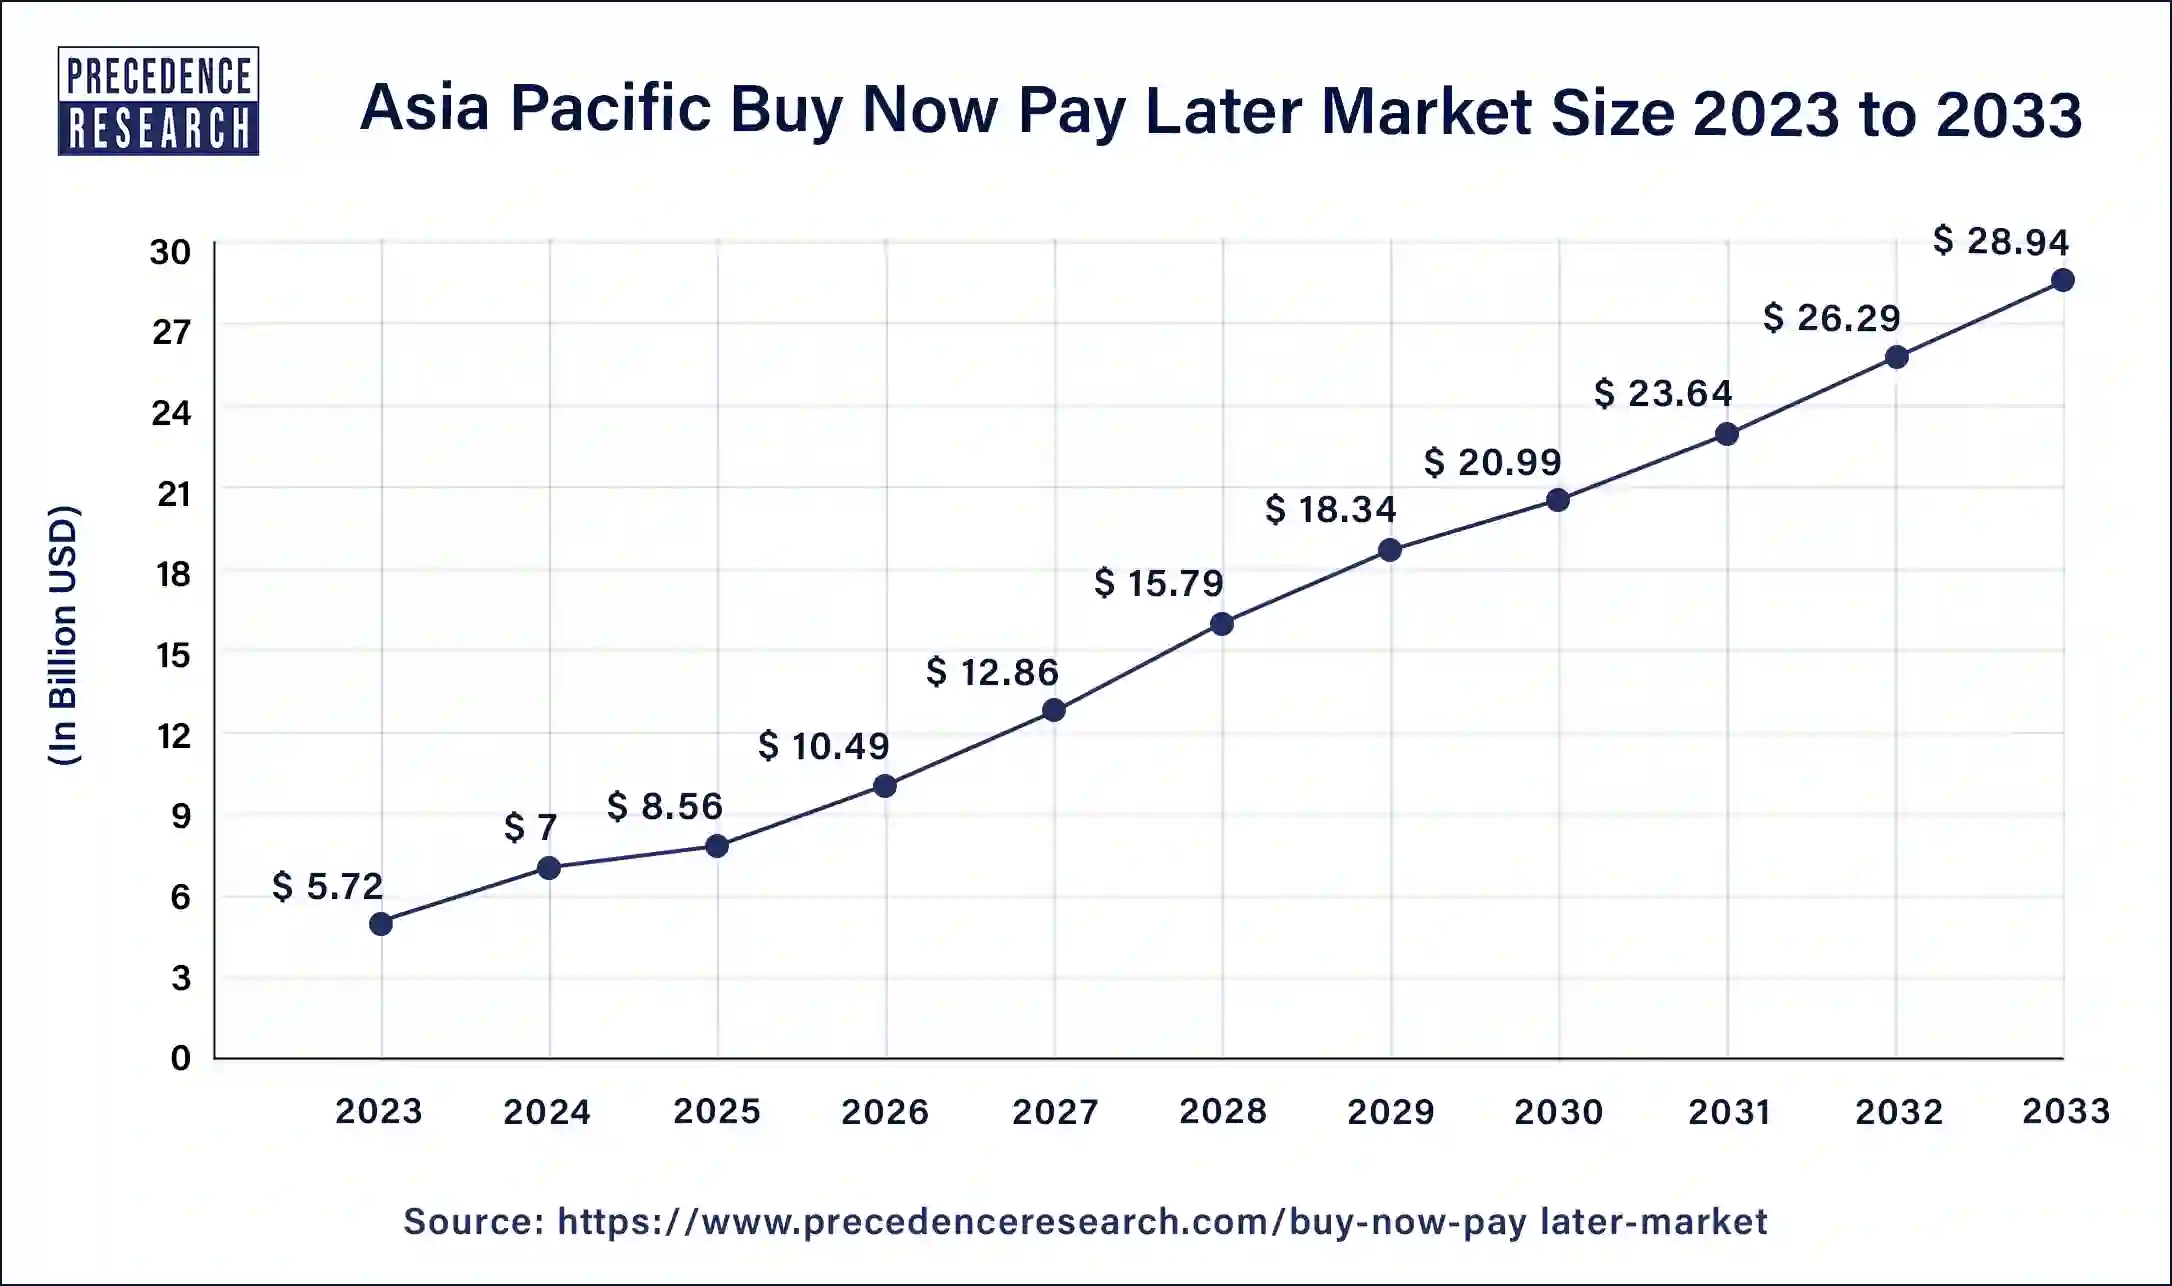 Asia Pacific Buy Now Pay Later Market Size 2024 to 2033